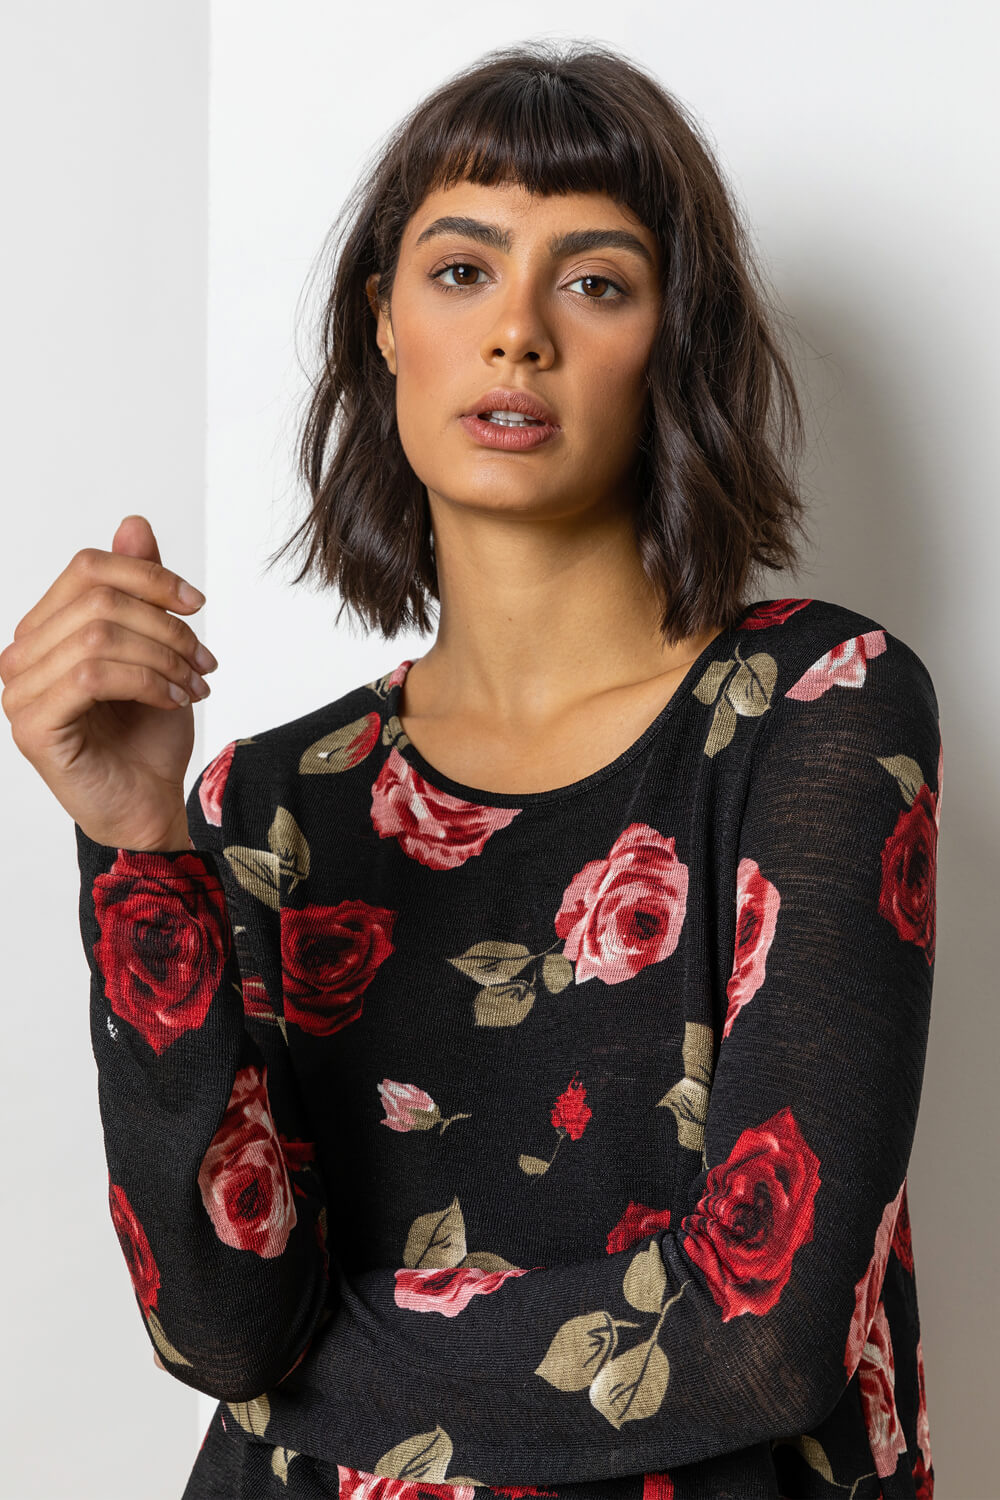 PINK Floral Rose Print Layered Asymmetric Top , Image 4 of 5